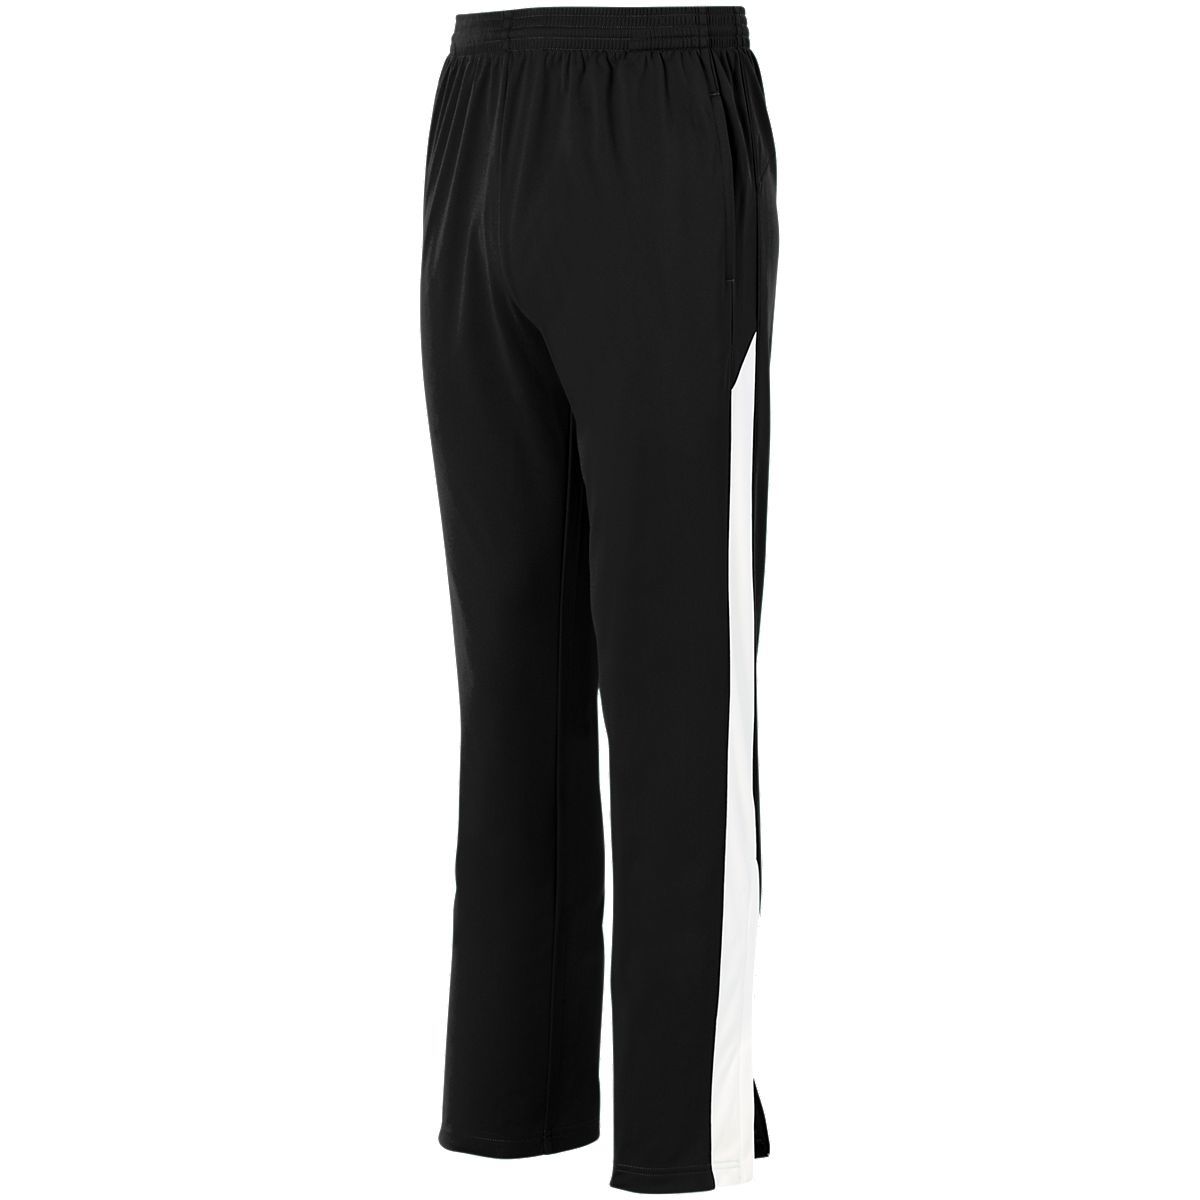 Augusta Sportswear Youth Medalist Pant 2.0 in Black/White  -Part of the Youth, Youth-Pants, Pants, Augusta-Products product lines at KanaleyCreations.com